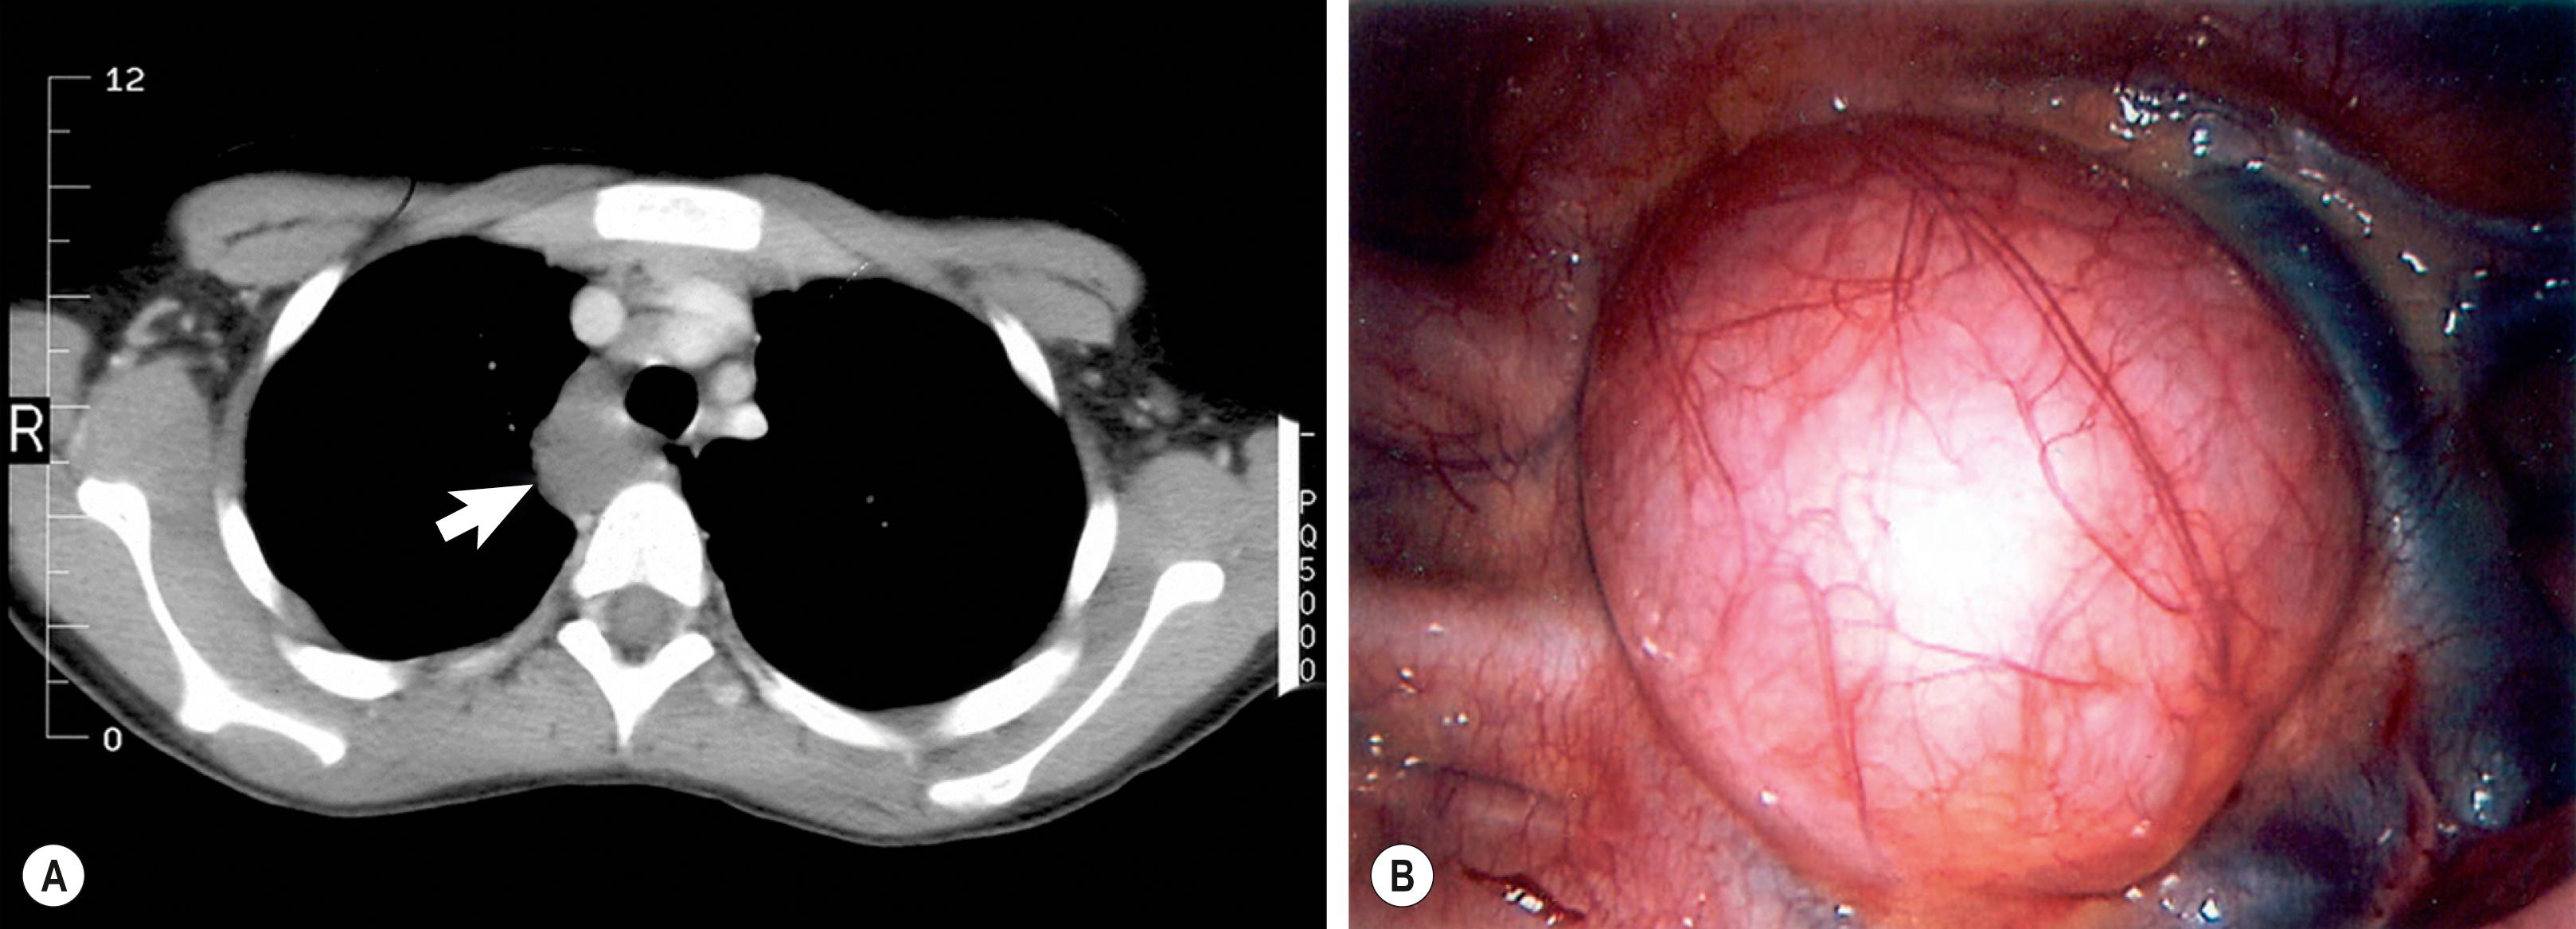 Fig. 39.8, This 16-year-old patient was found to have a posterior mediastinal mass on chest radiograph. CT scan (A) shows the duplication (arrow) to be adjacent to the trachea and the esophagus. On the right (B), the duplication is visualized at thoracoscopy and was excised without complications.